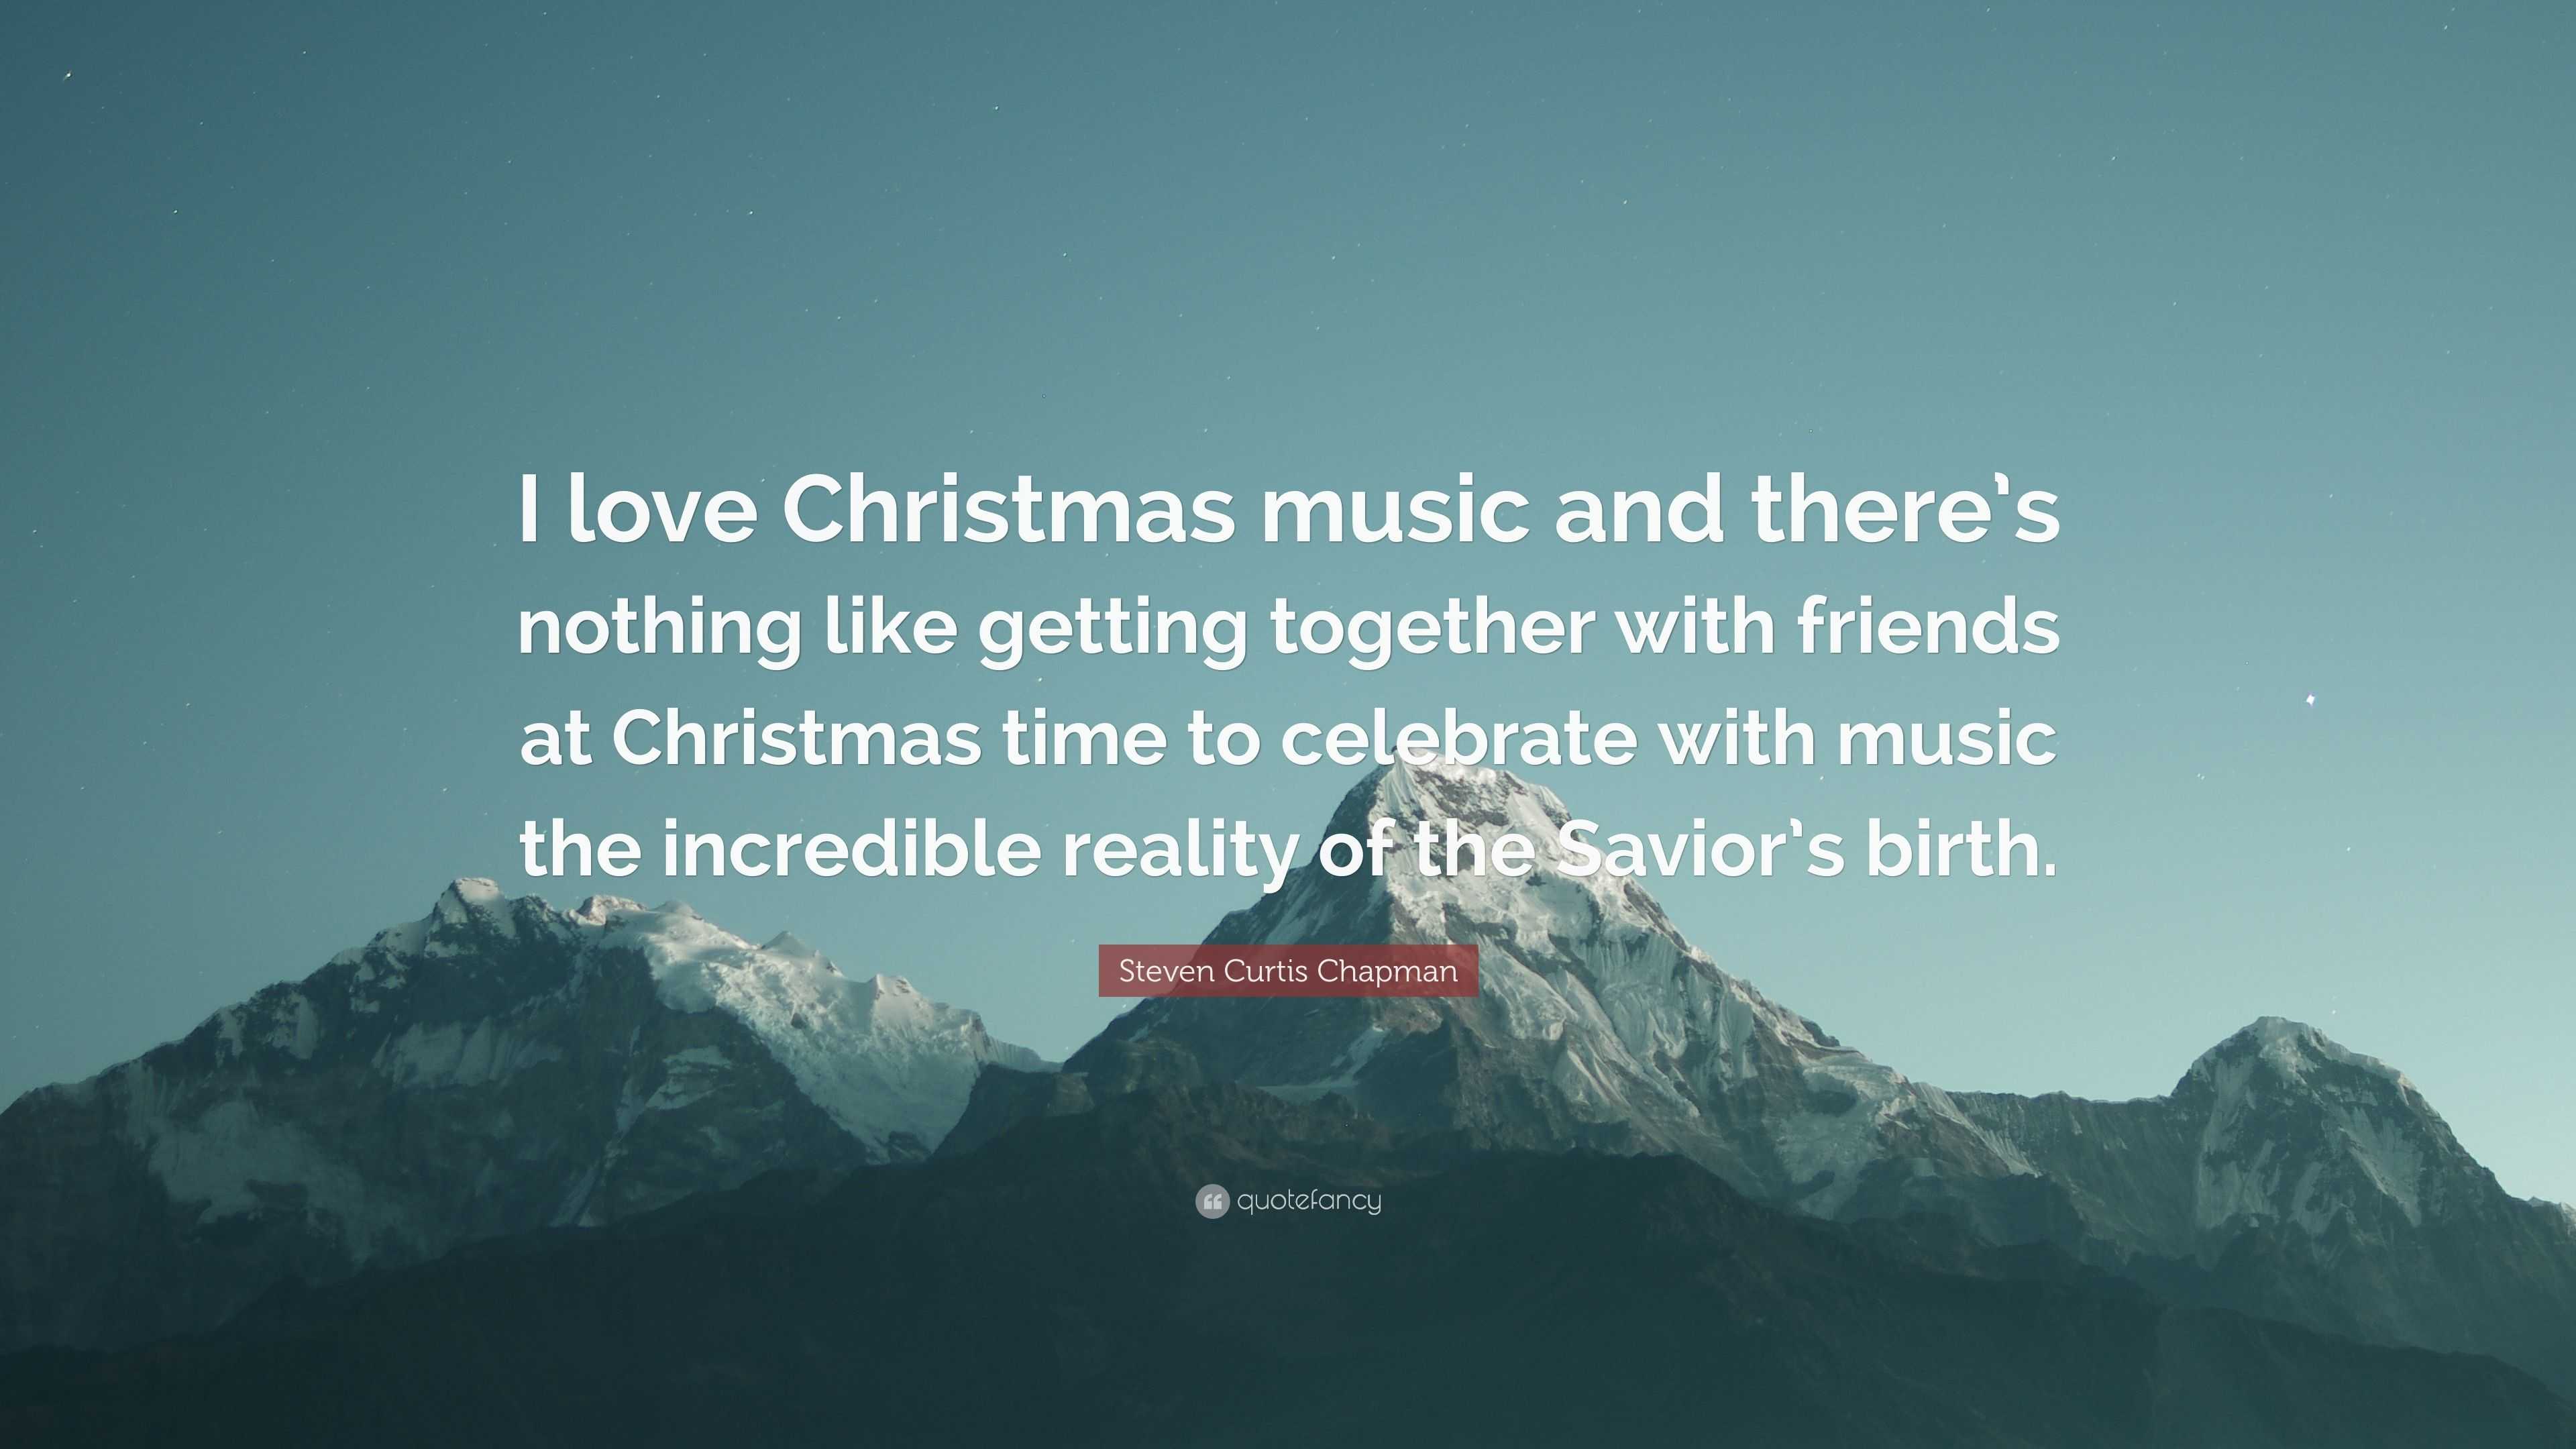 Steven Curtis Chapman Quote: “I love Christmas music and there’s ...